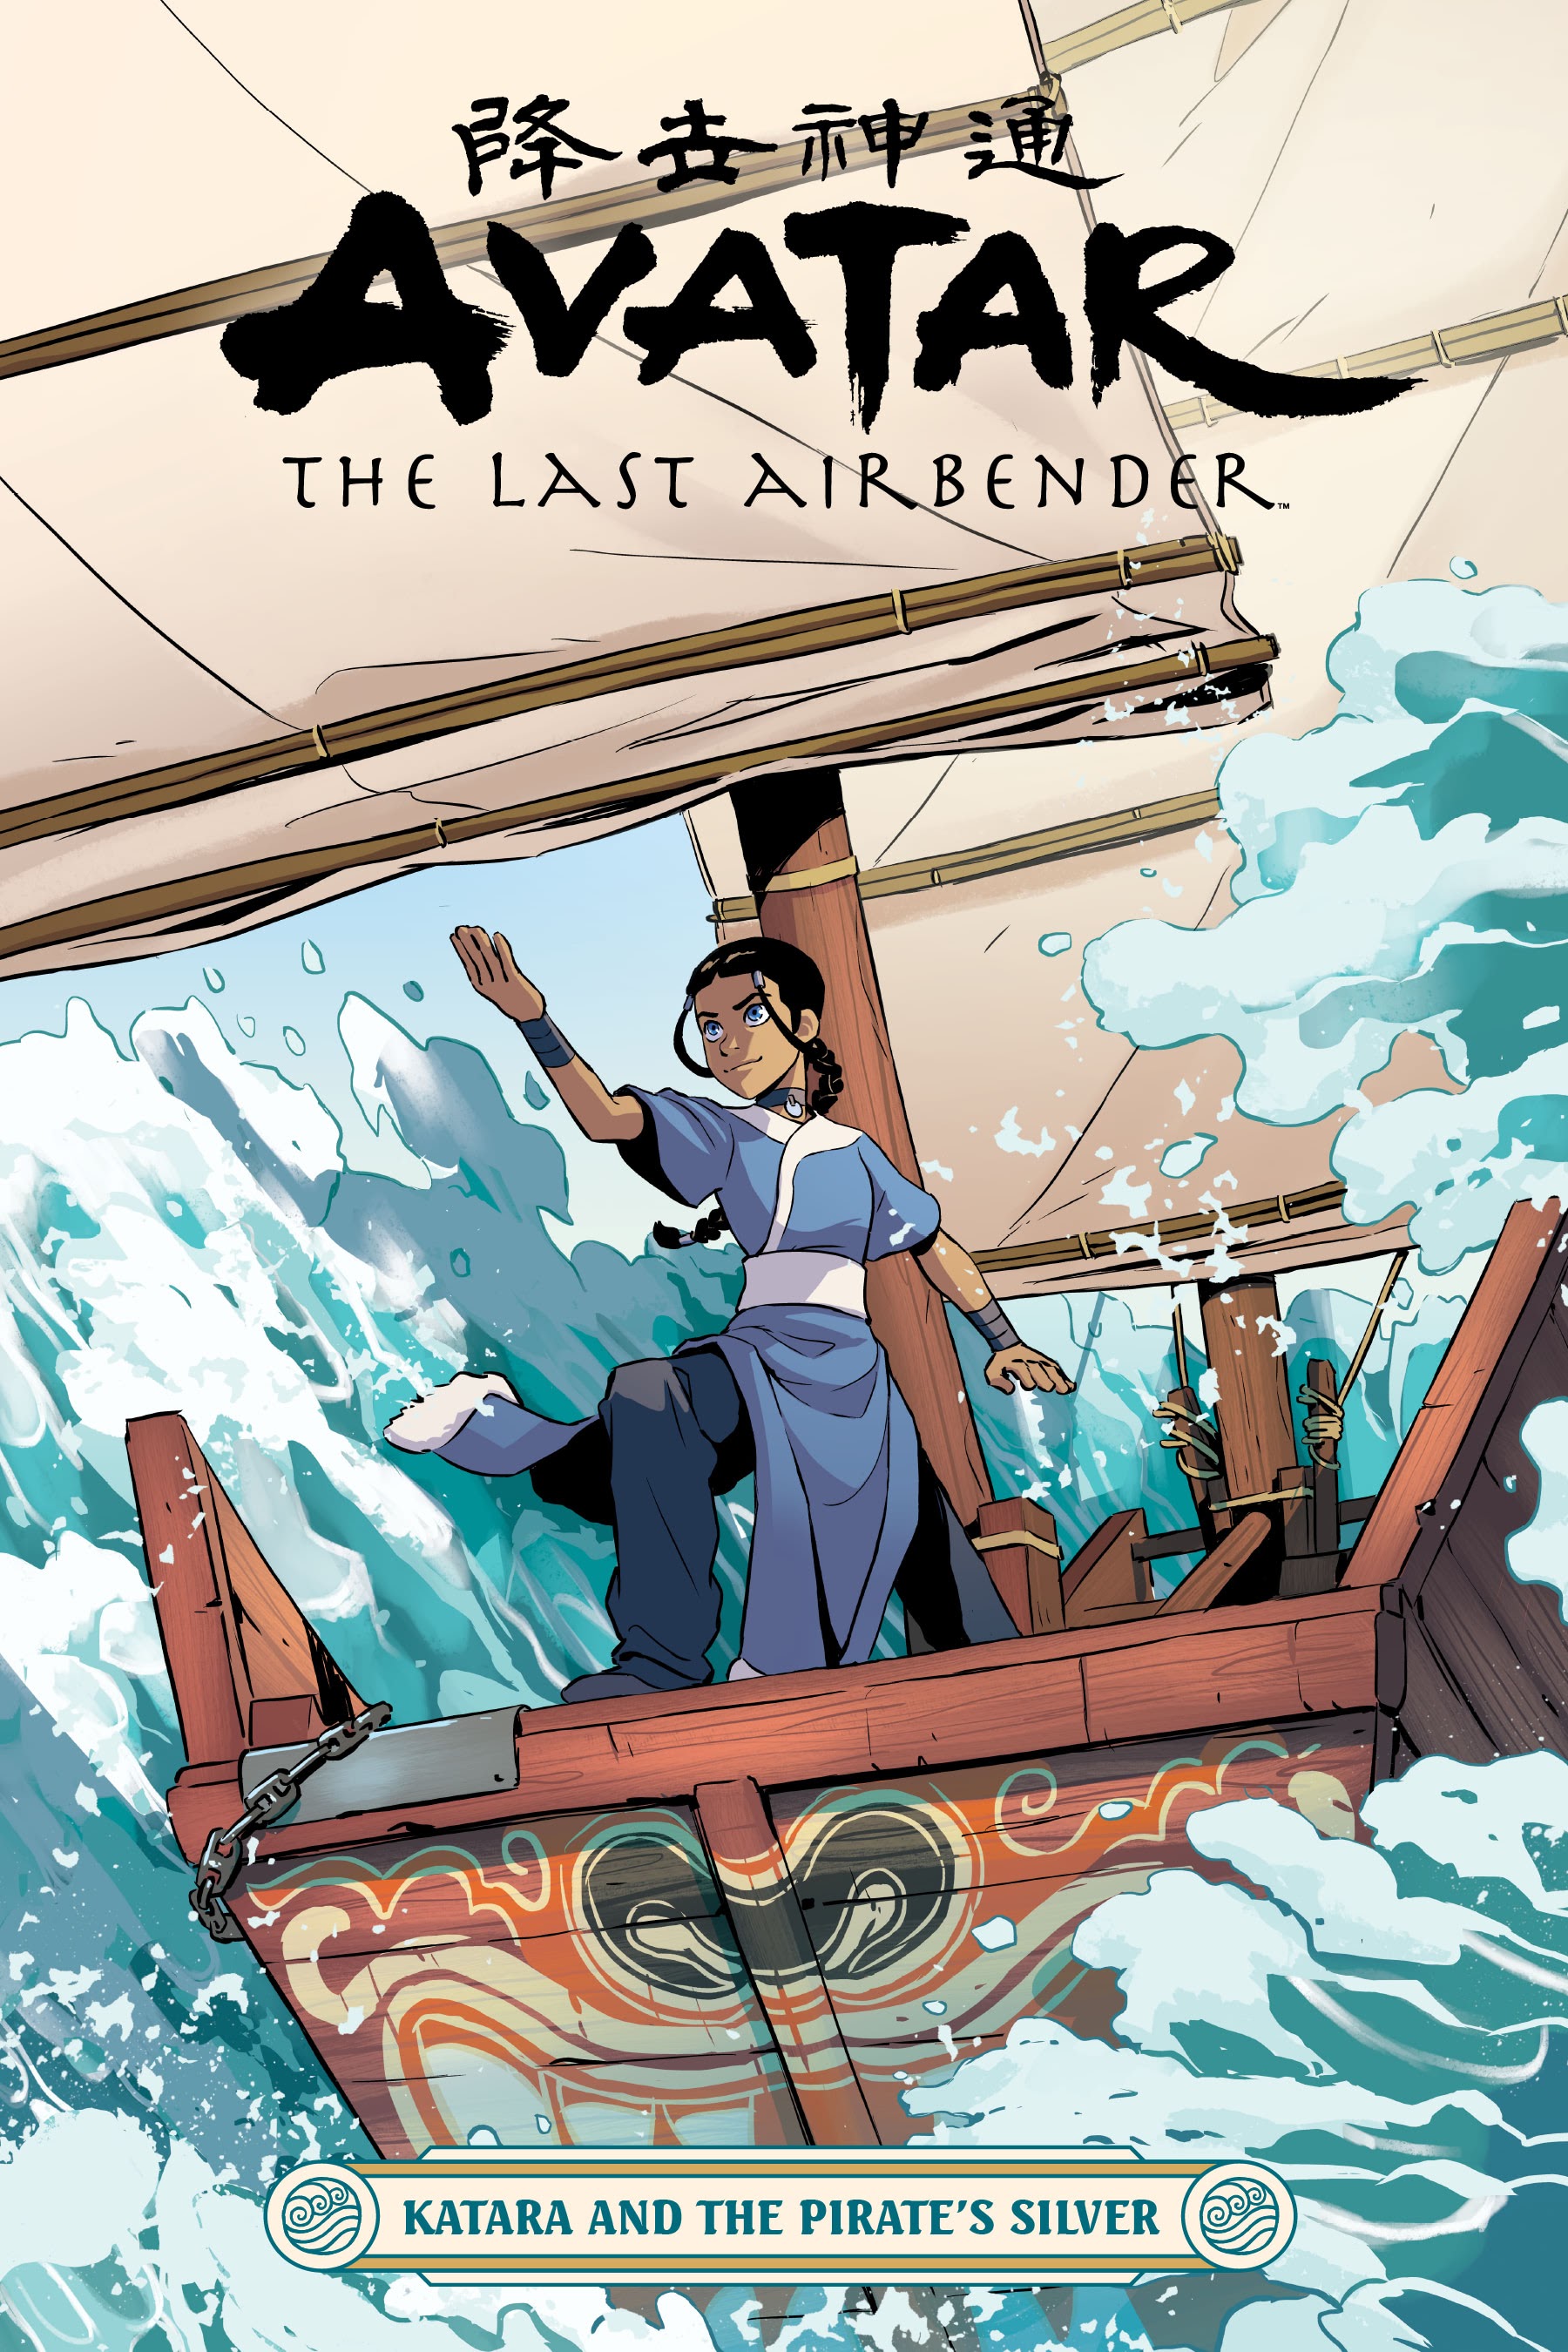 Read online Avatar: The Last Airbender—Katara and the Pirate's Silver comic -  Issue # TPB - 1